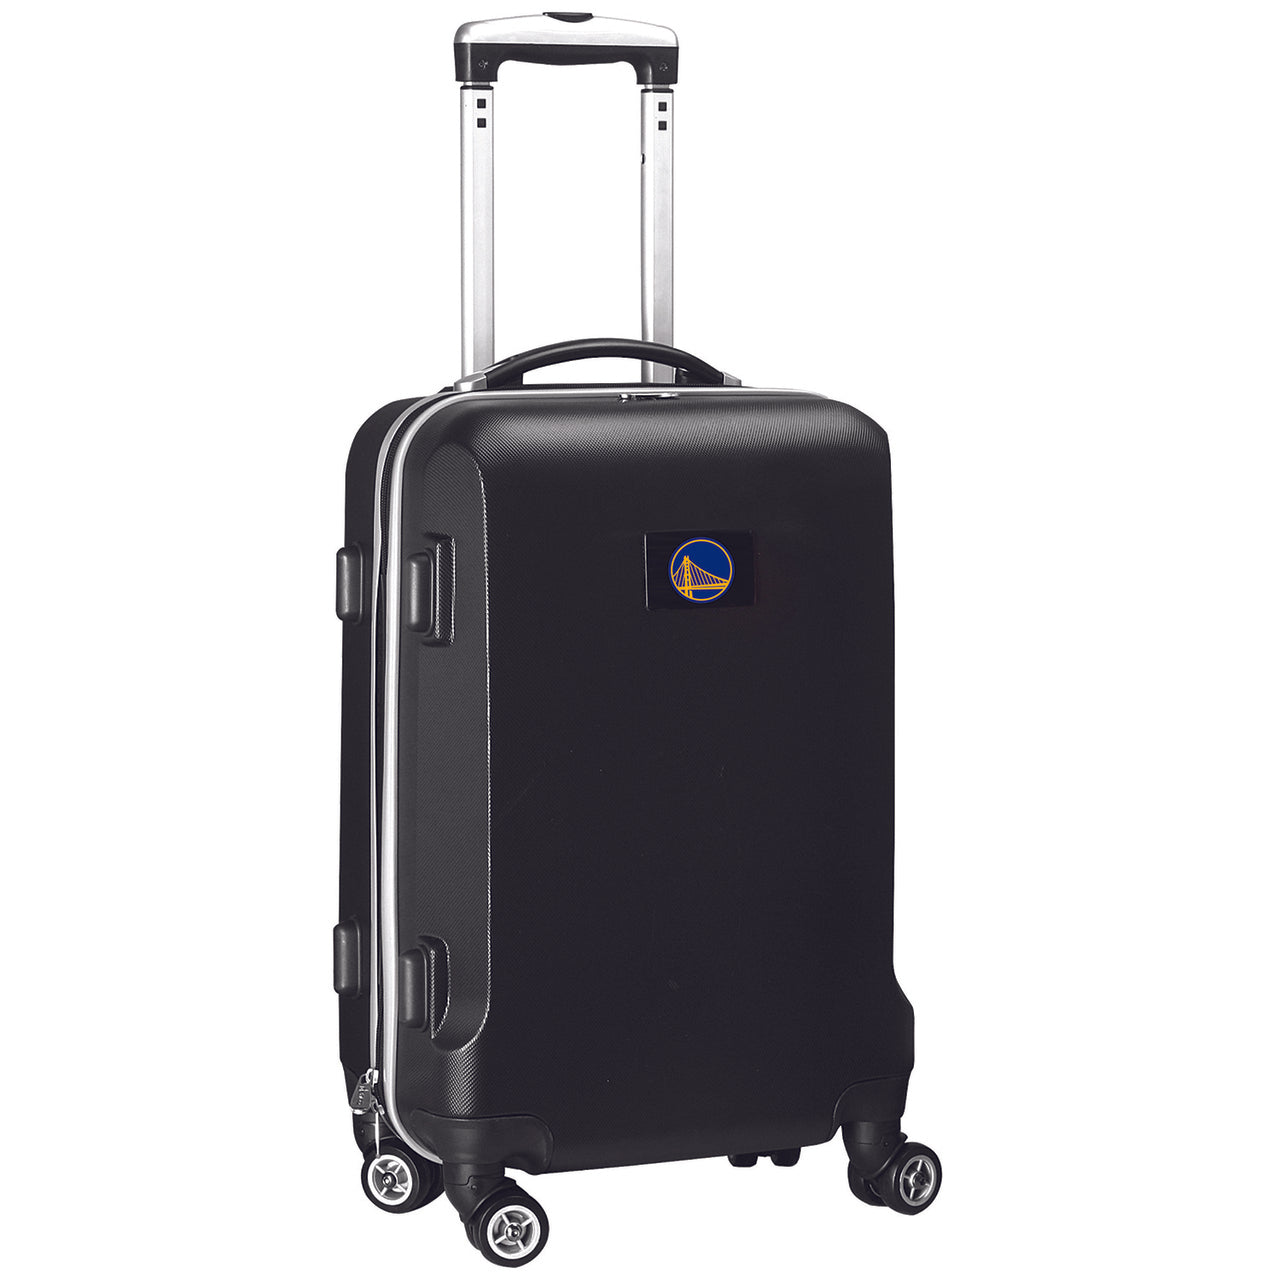 Golden State Warriors 20" Hardcase Luggage Carry-on Spinner